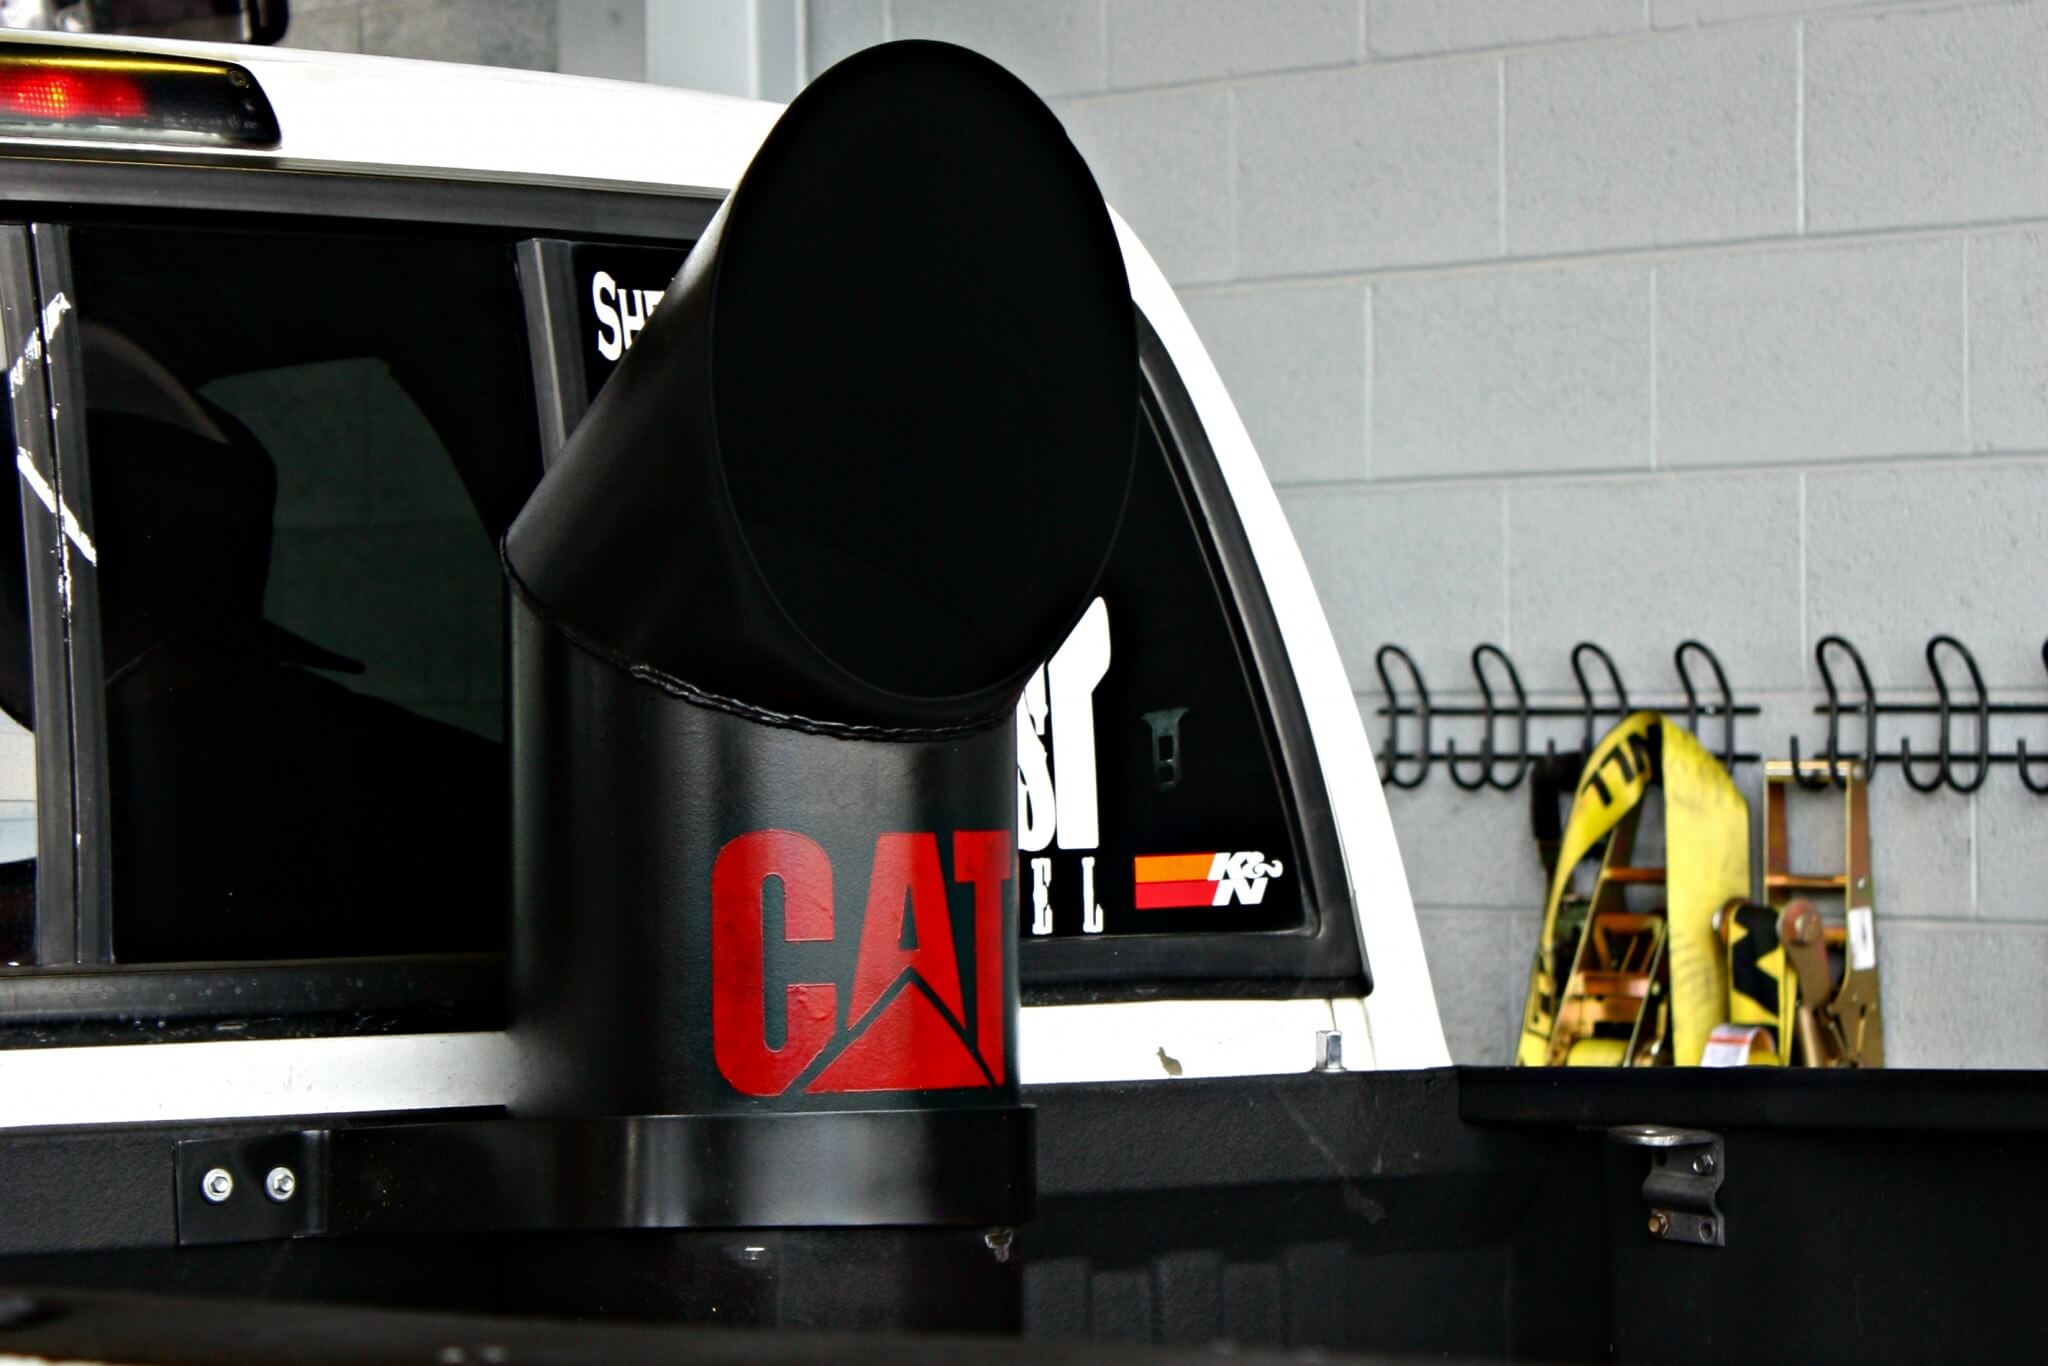 A Cummins diesel with a Caterpillar sticker? Well, the stack came off of a Caterpillar dozer, so that makes it legal to run the decal, right?